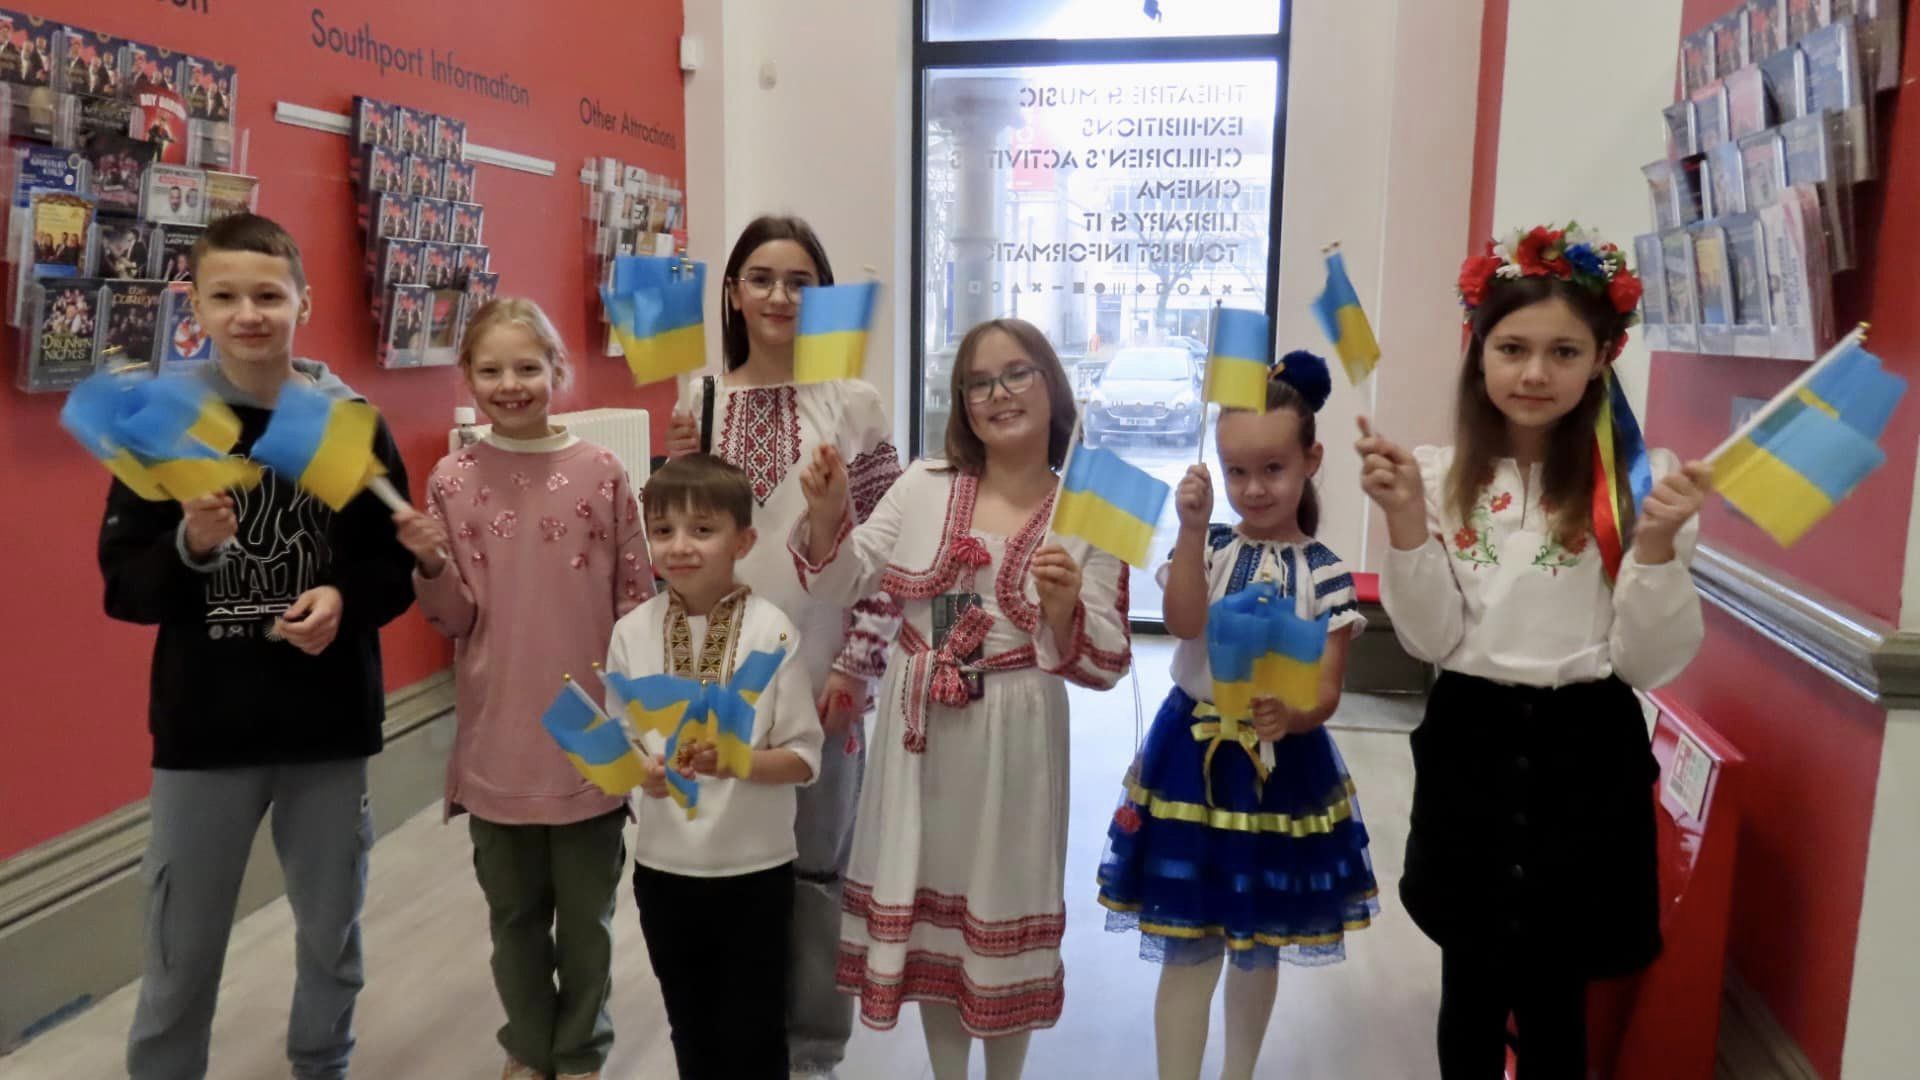 Visitors enjoyed the Ukrainian Day Celebrations at The Atkinson in Southport. Photo by Andrew Brown Stand Up For Southport